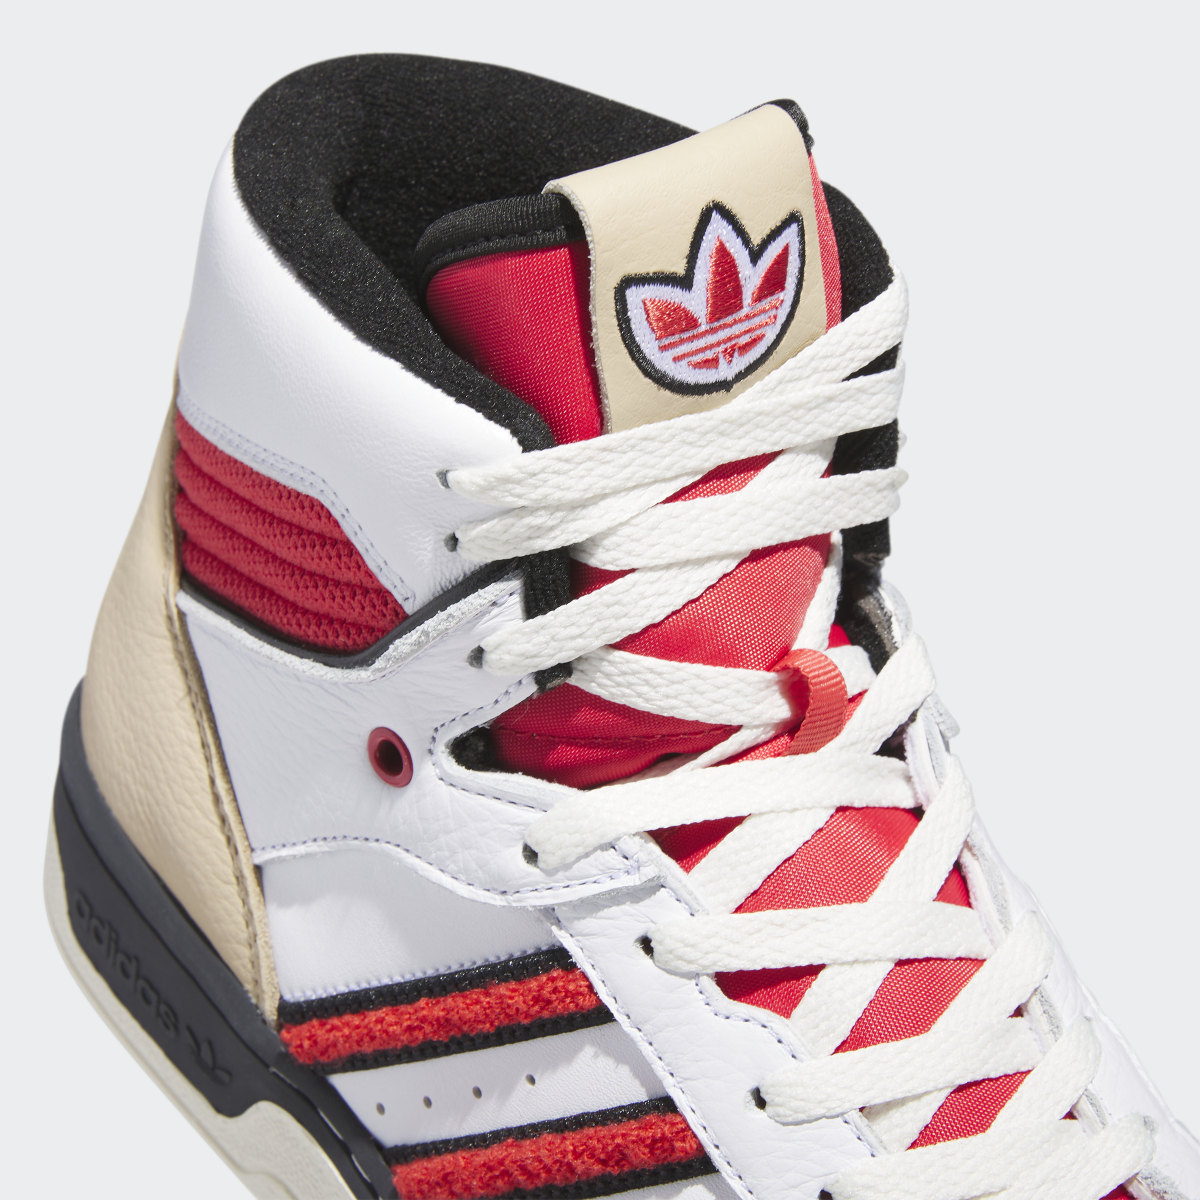 Adidas Rivalry High Shoes. 9